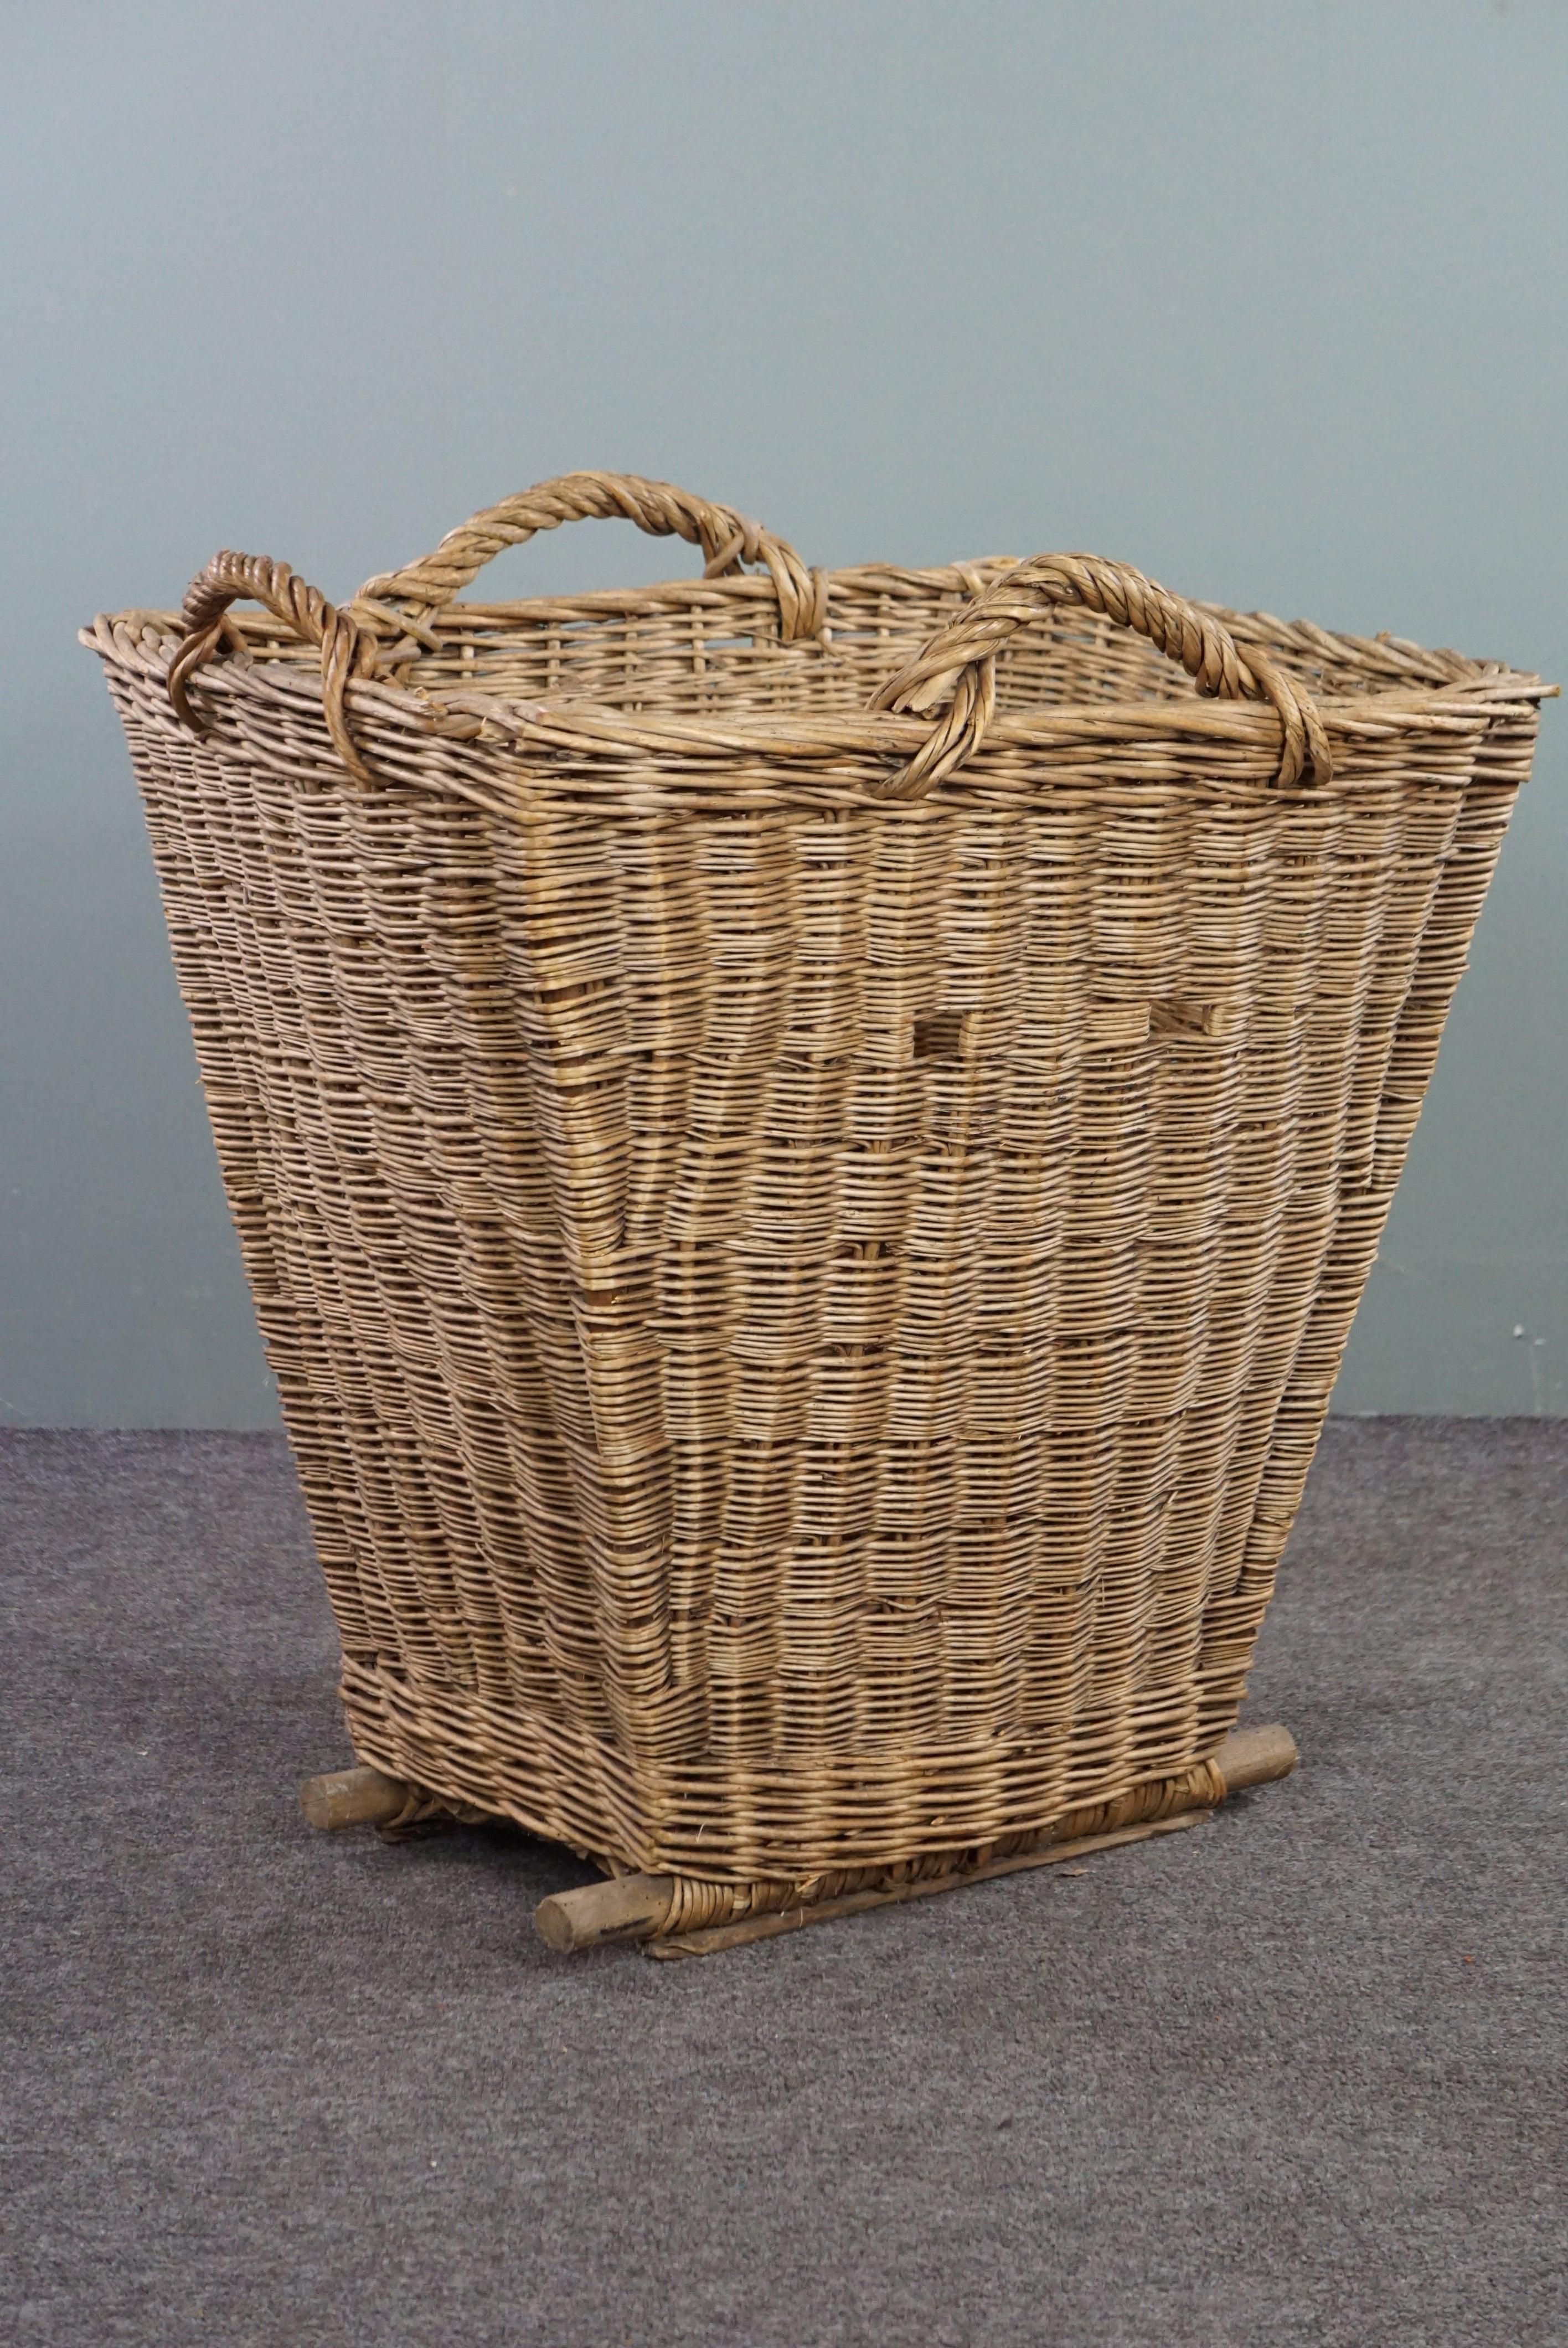 Offered is this large wicker basket for wooden blocks.
In autumn and winter the fireplace in our home is regularly lit. Next to a crackling fire we place a hand-woven wicker basket that fits many logs. This means we have everything at hand for a